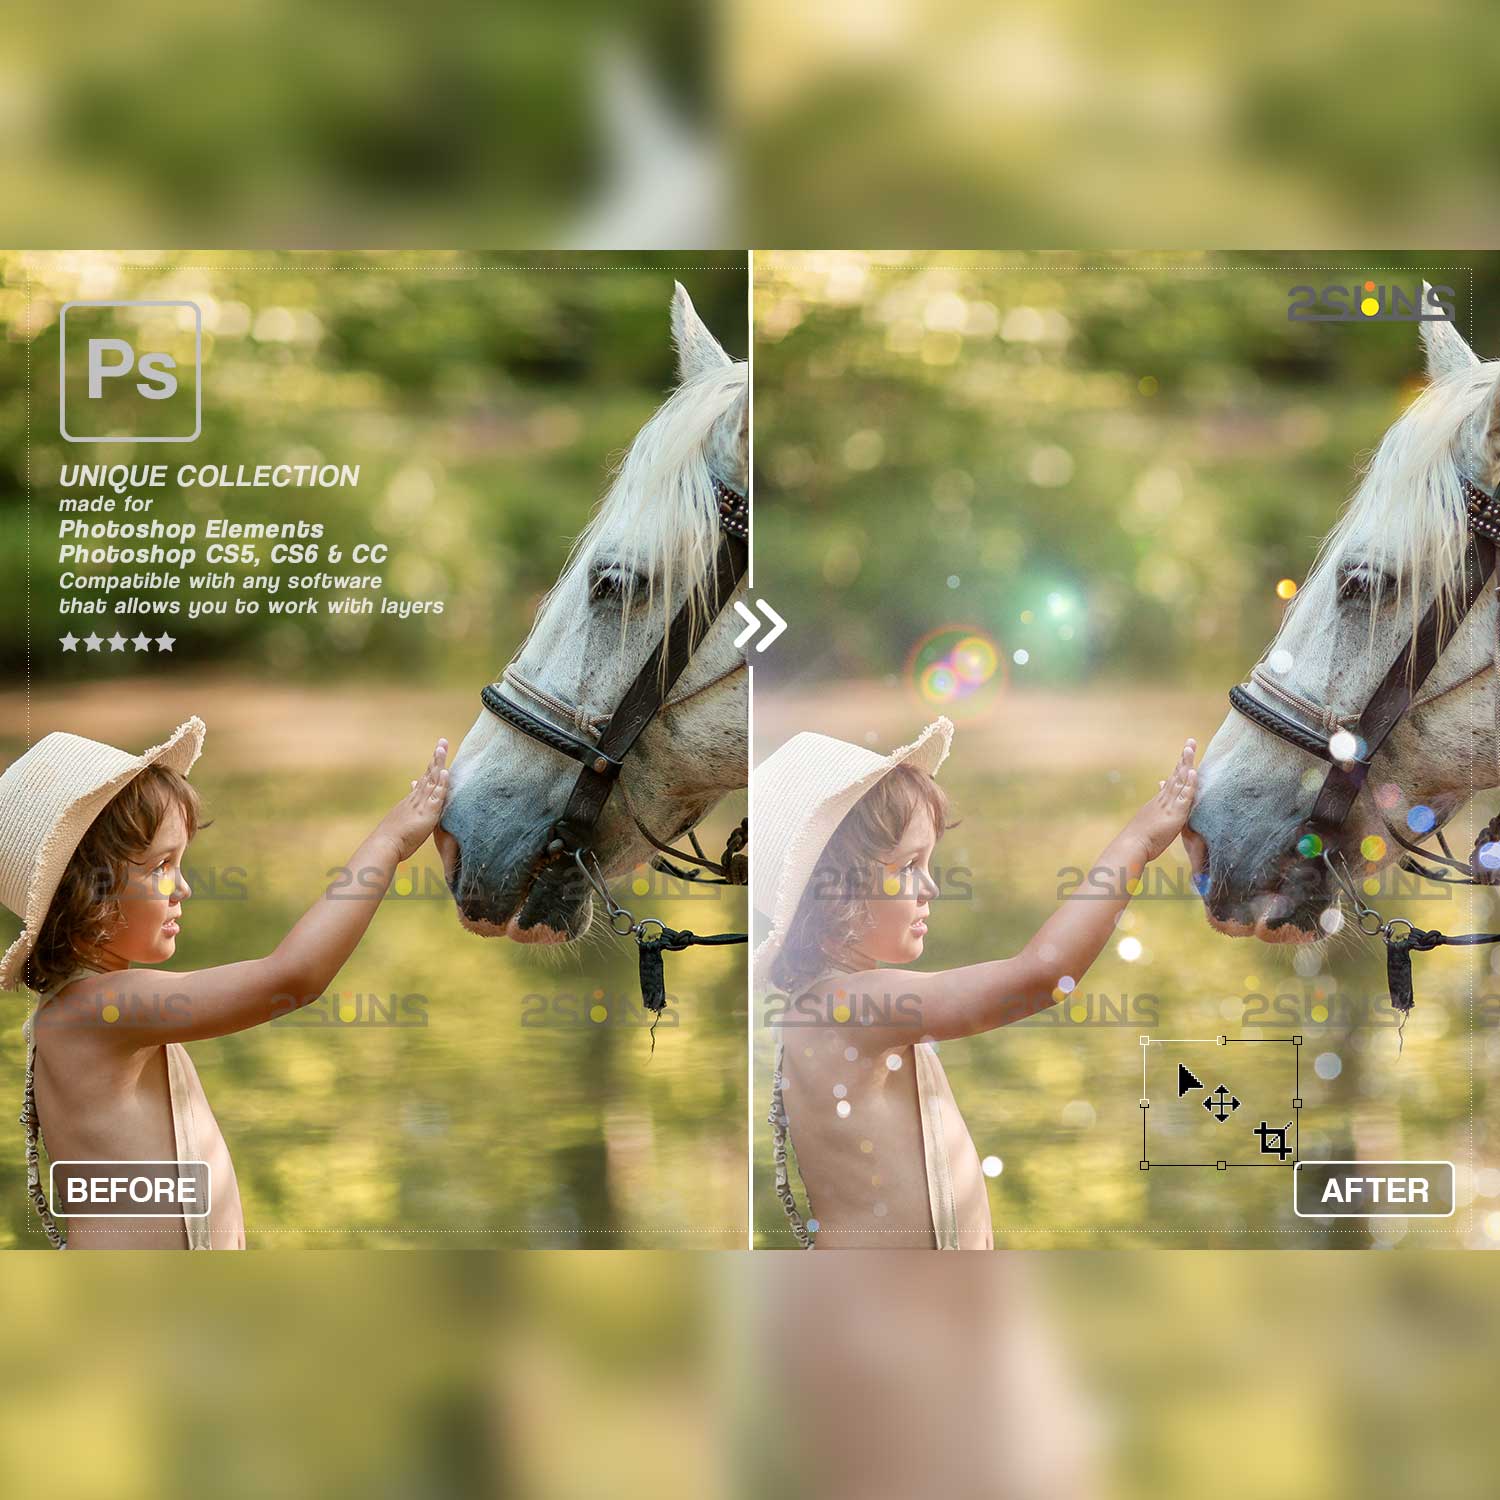 Sun Flares And Sunlight Photoshop Overlays Horse Before After Example.